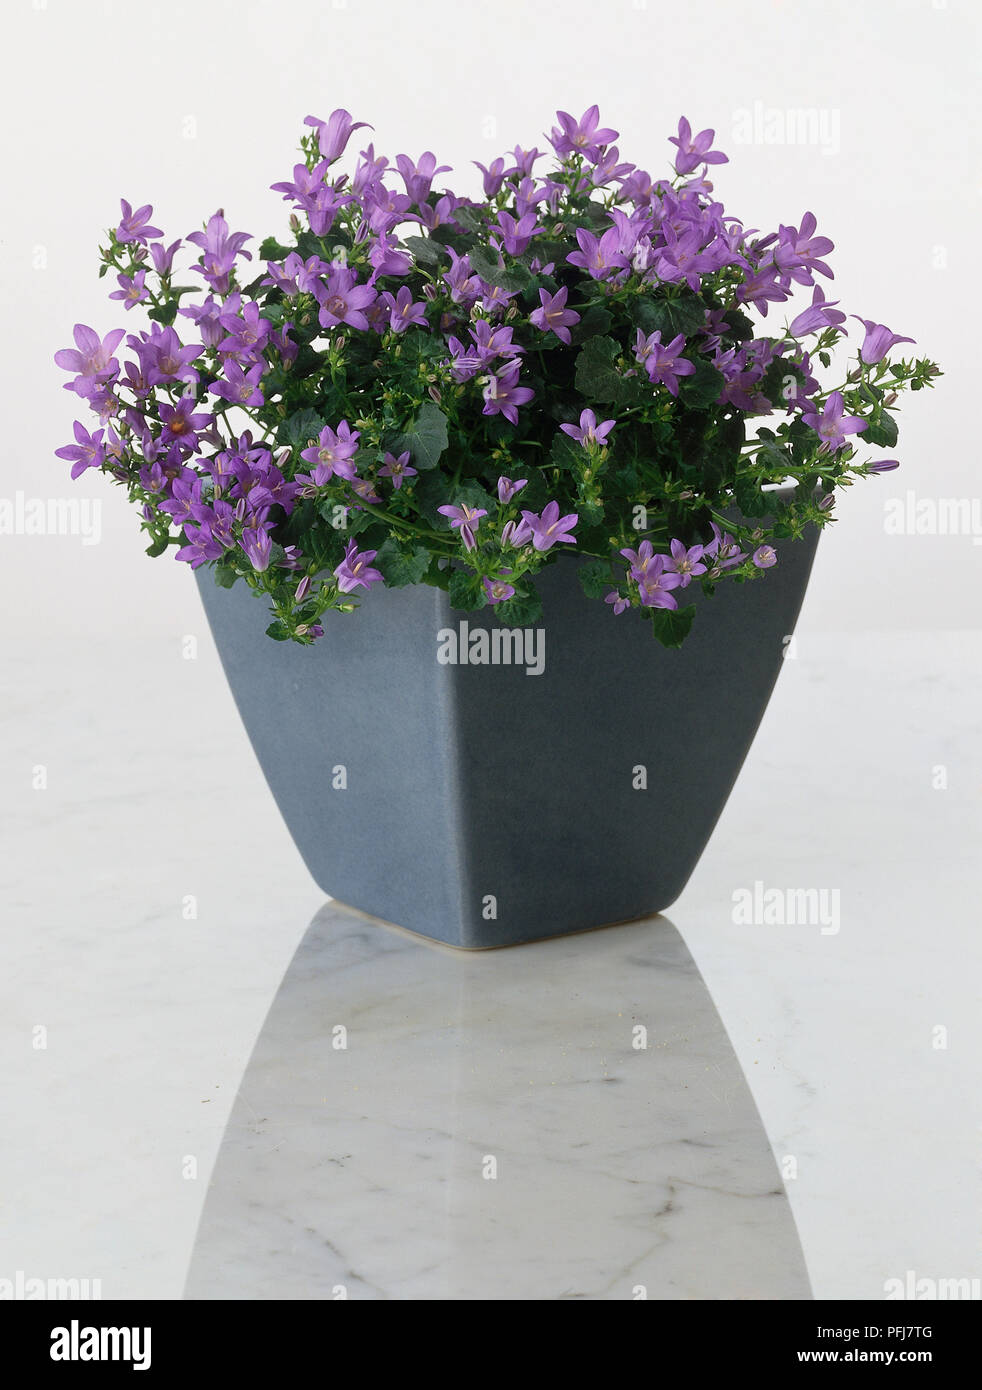 Star-of-Bethlehem (Campanula isophylla), bushy plant with small green leaves, covered with purple flowers, dark blue pot on marble surface Stock Photo